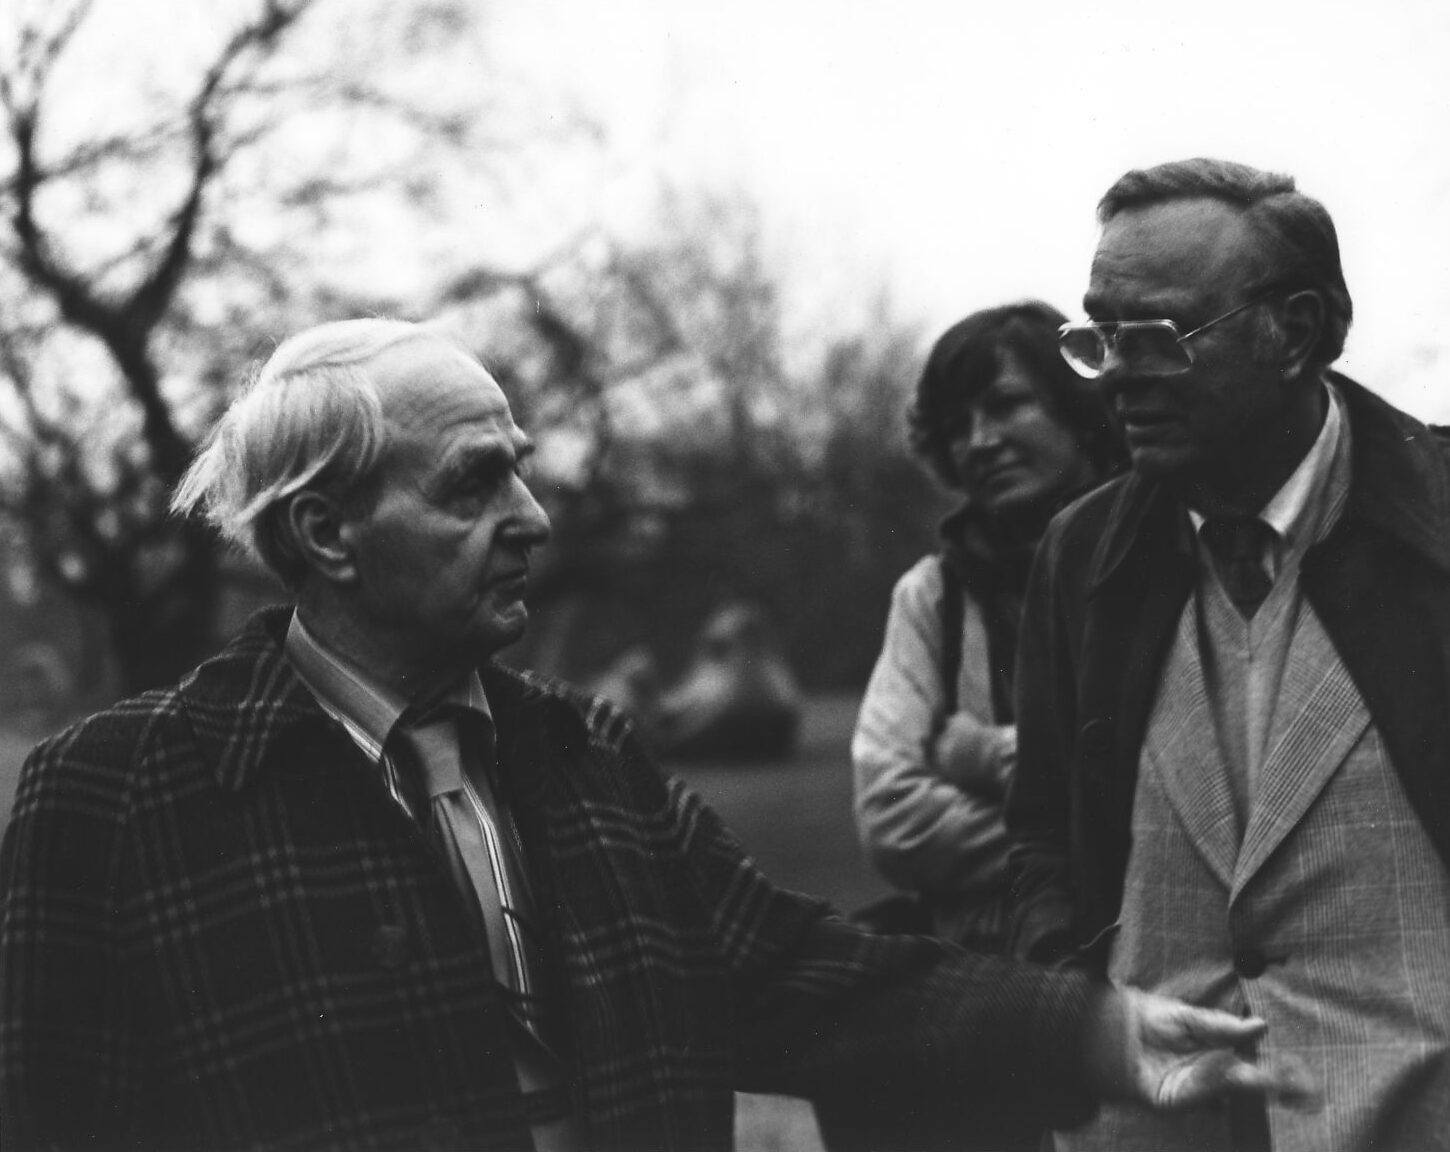 Motherwell and sculptor Henry Moore, Hertfordshire, England, January 1978